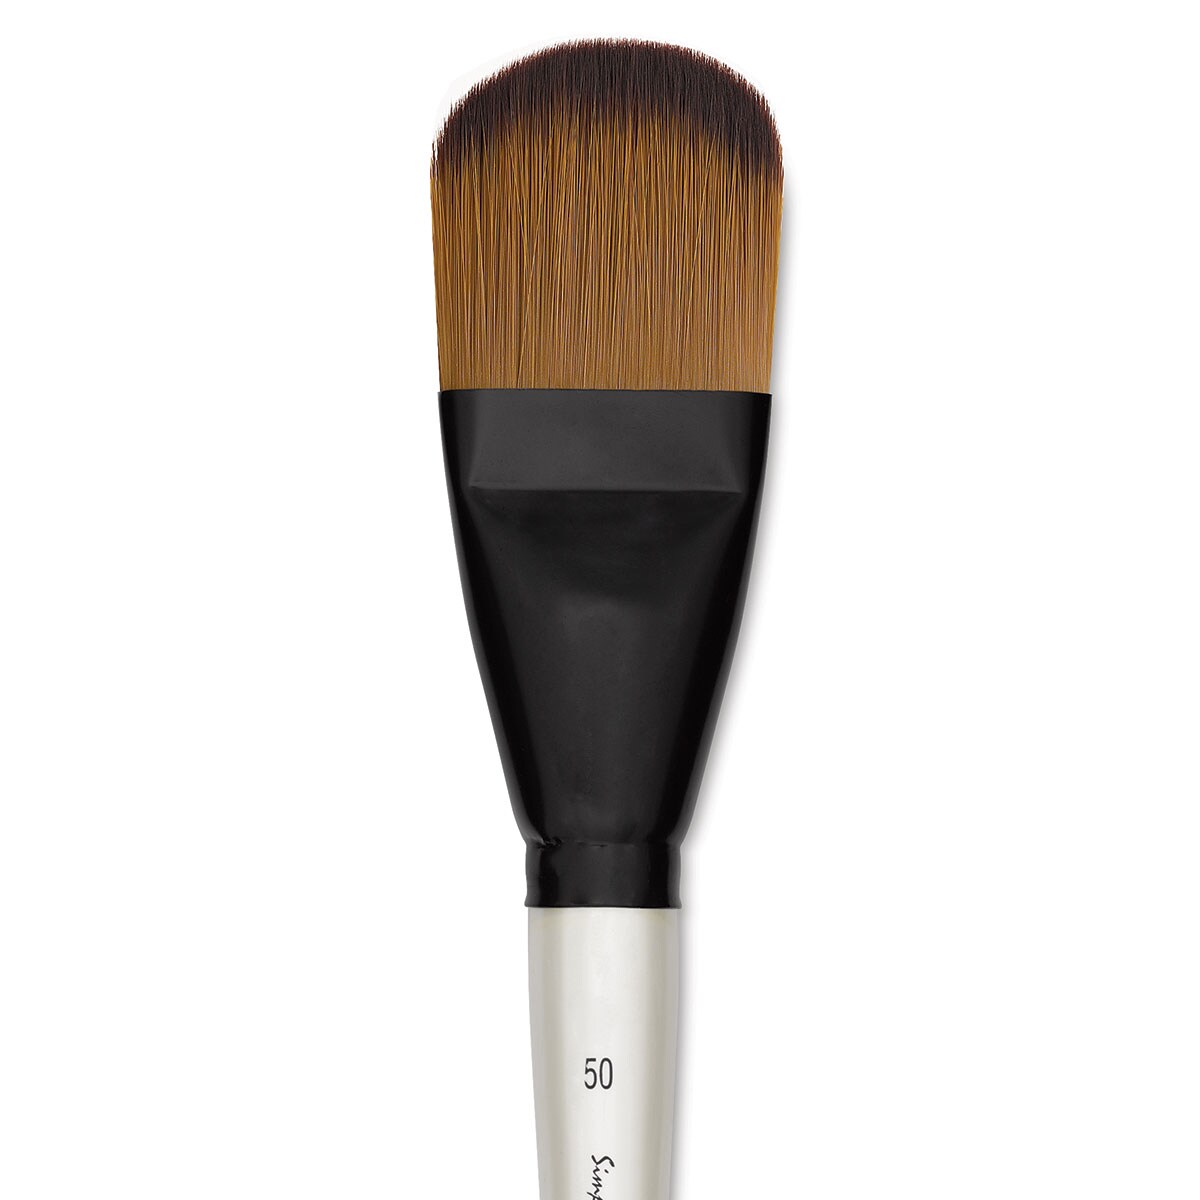 Simply Simmons XL Soft Synthetic Brush - Filbert, Size 50